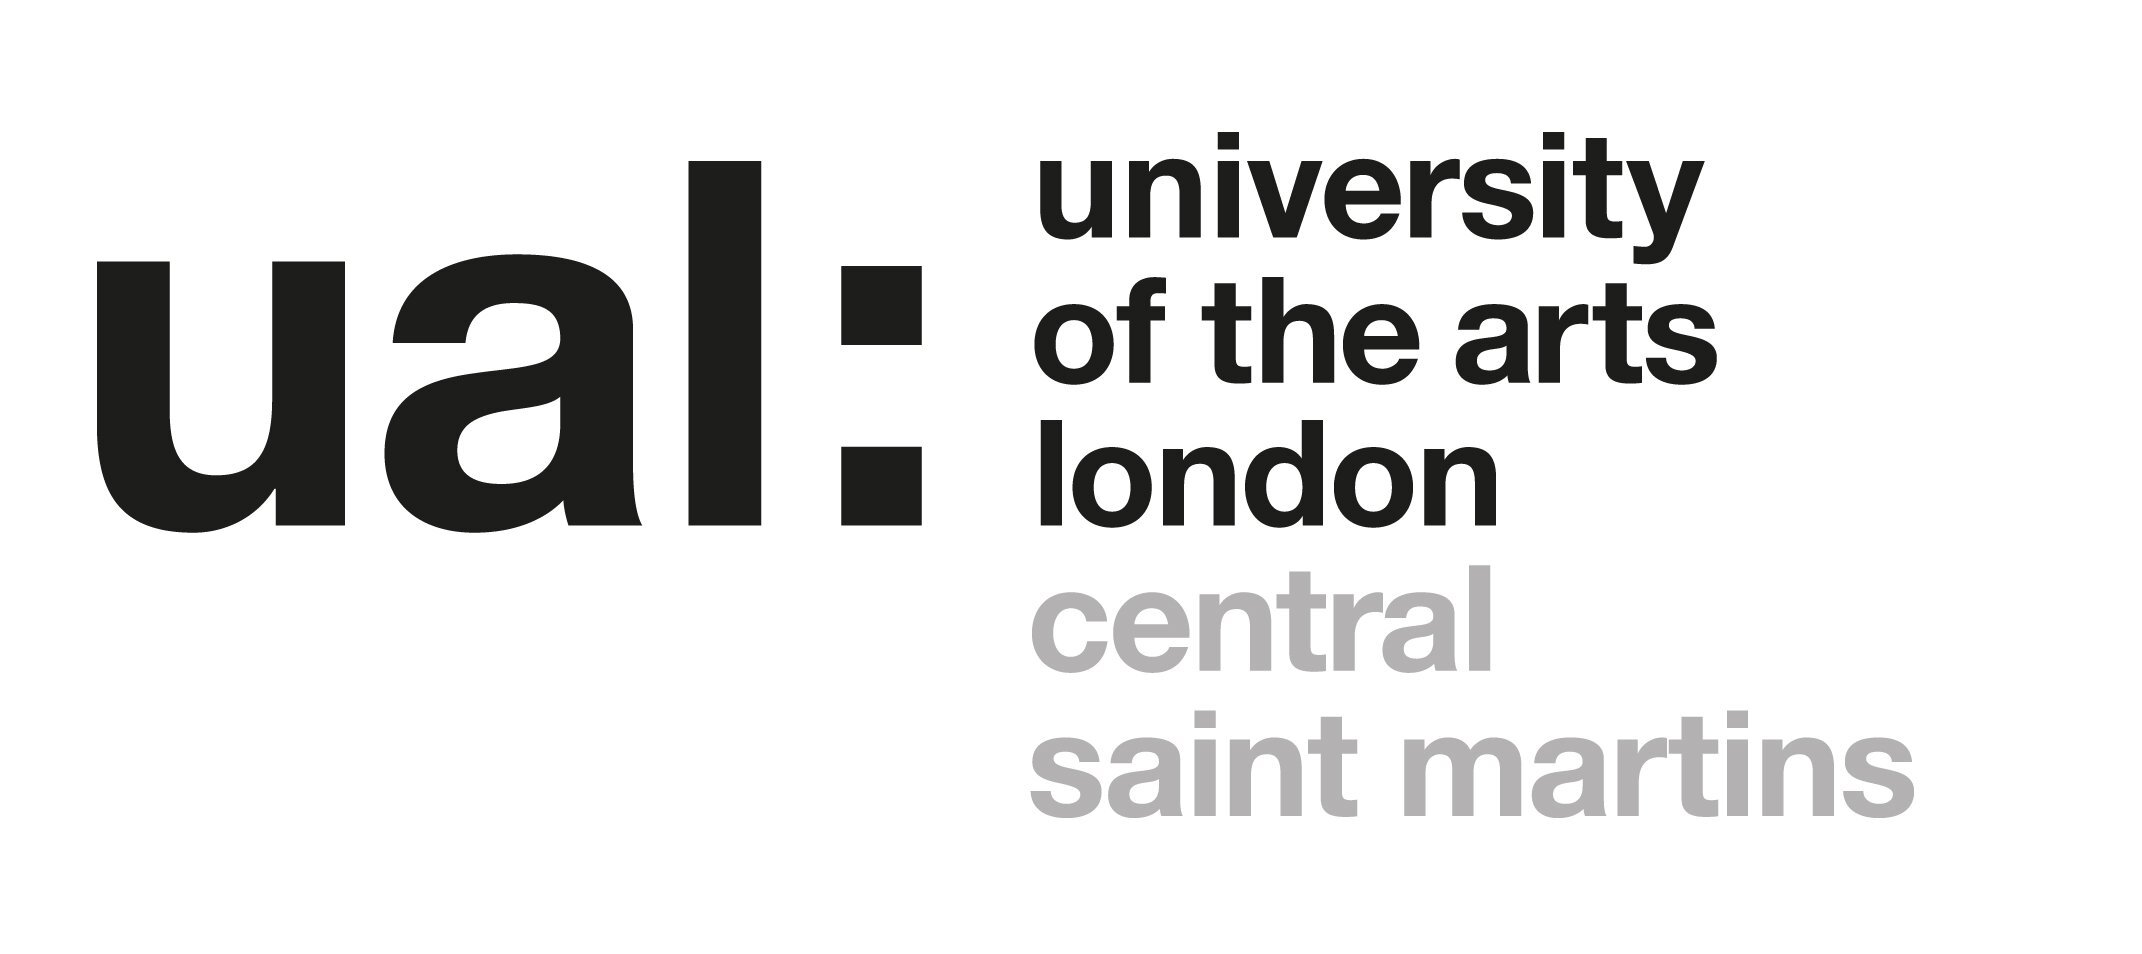 open-call-applications-for-postgraduate-courses-at-central-saint-martins-ual-142737.jpg